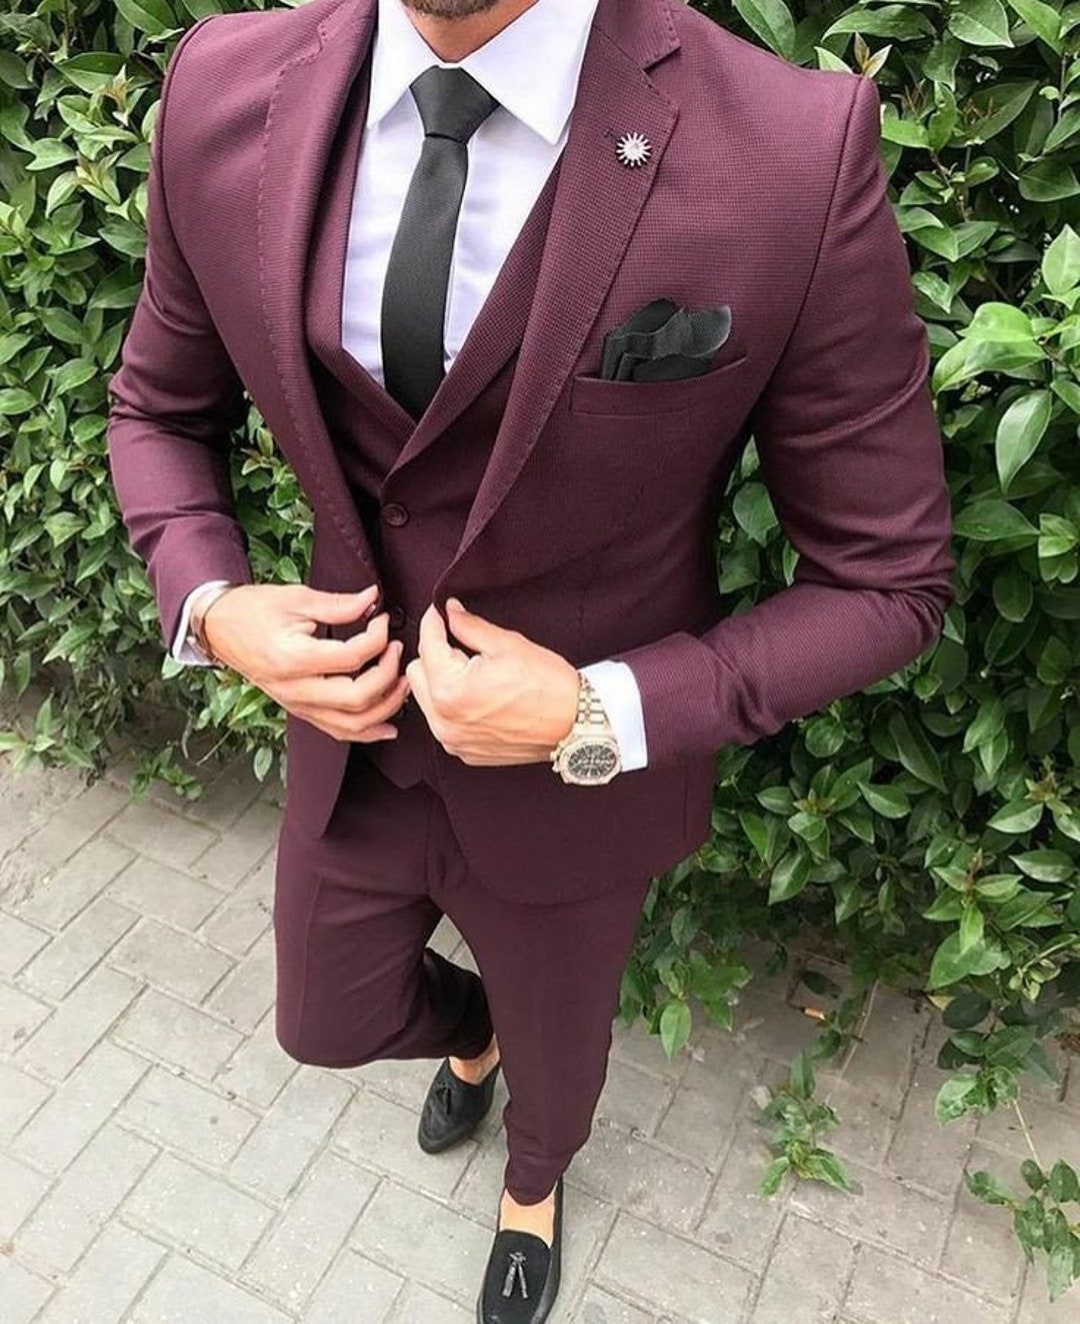 21 Dashing Formal Outfit Ideas For Men  Mens business casual outfits,  Formal mens fashion, Formal men outfit